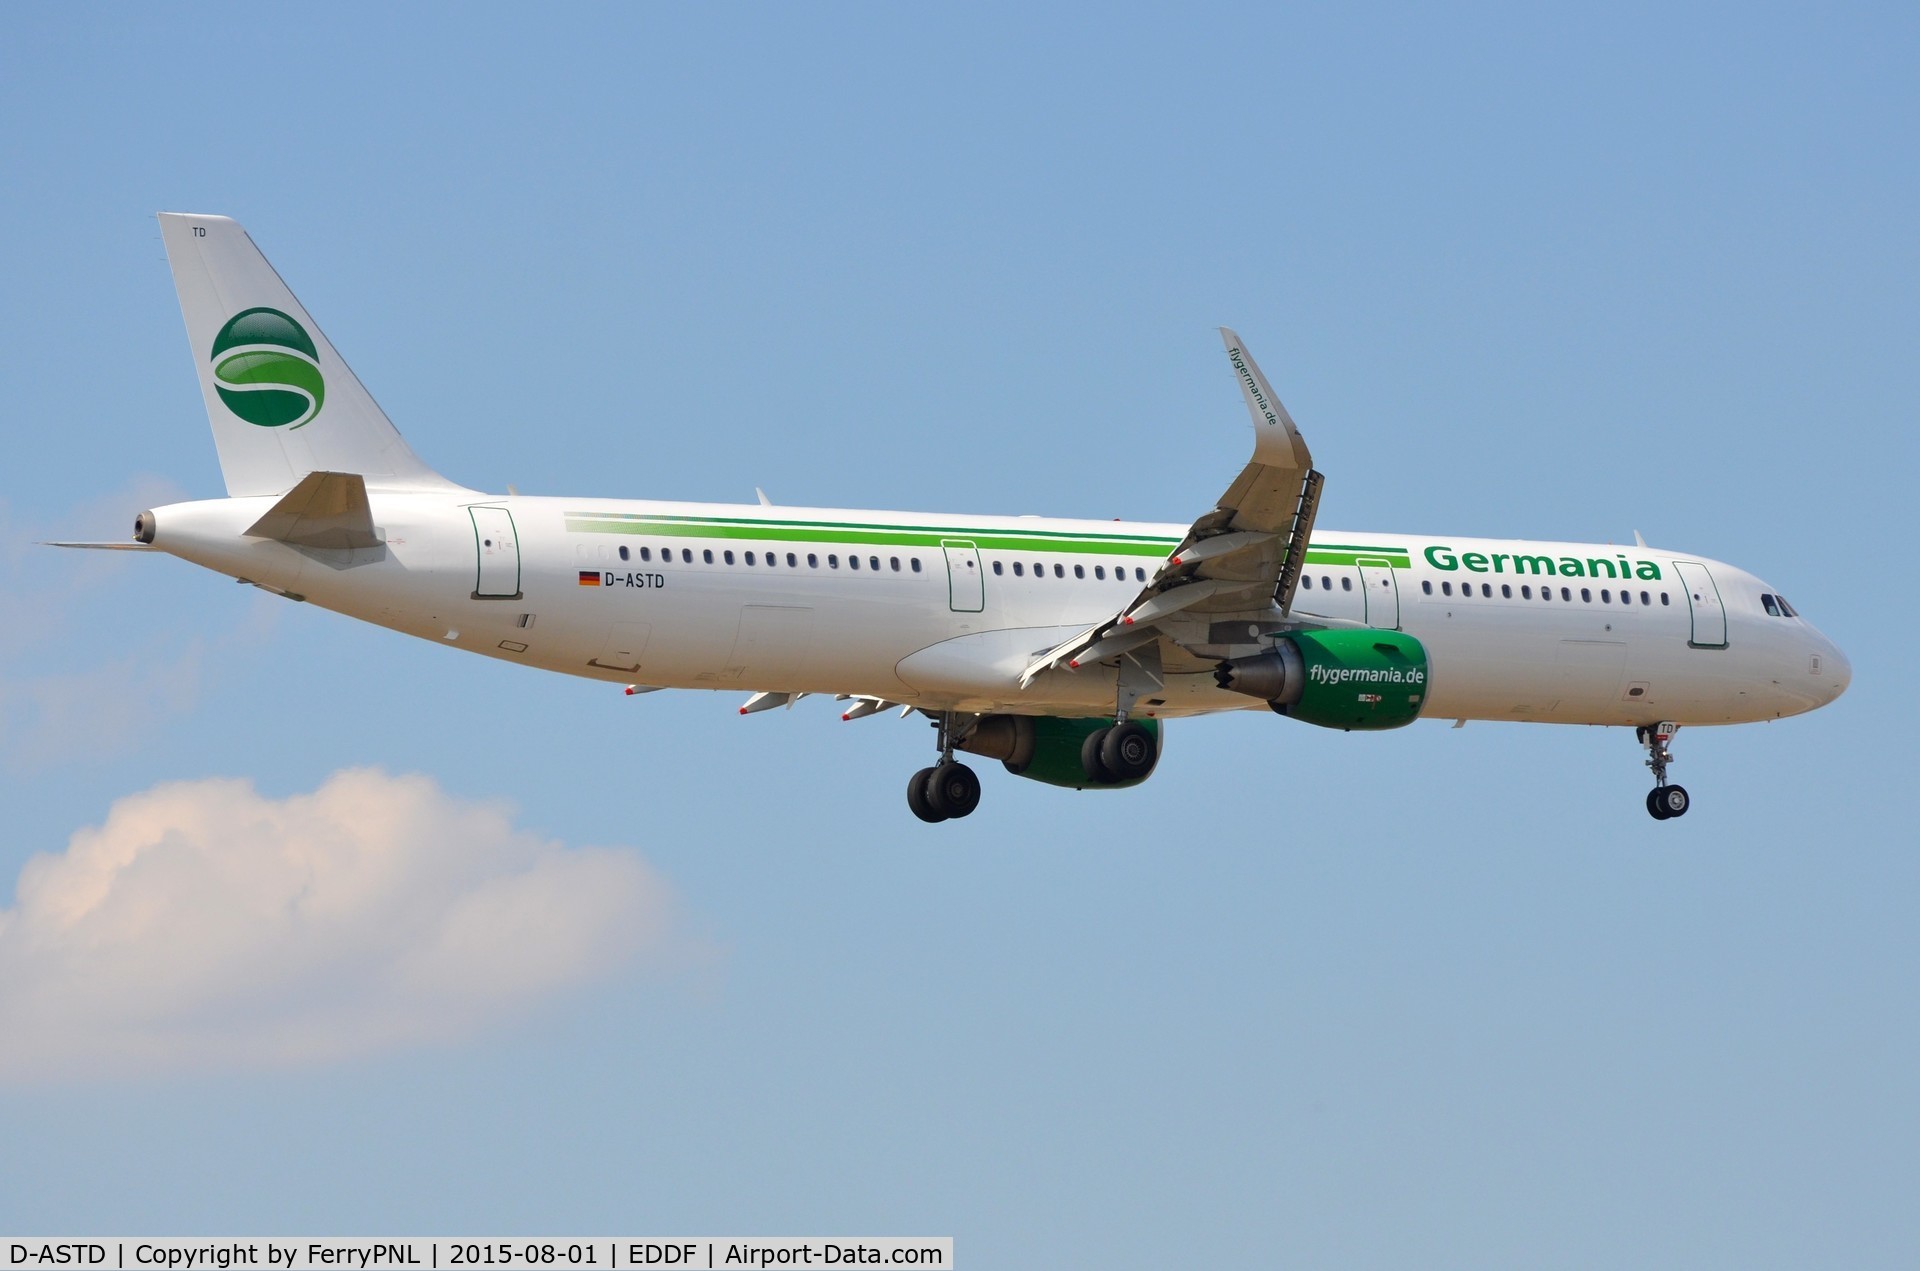 D-ASTD, 2013 Airbus A321-211 C/N 5843, Germania A321 landing. Aircraft moved on to Germania div in Switserland as HB-JOI in Oct 2015.